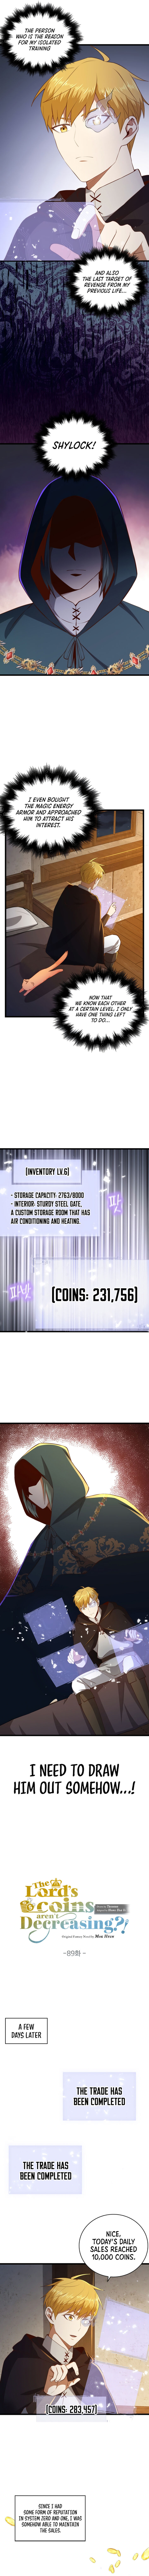 The Lords Coins Arent Decreasing Chapter 89 Page 3